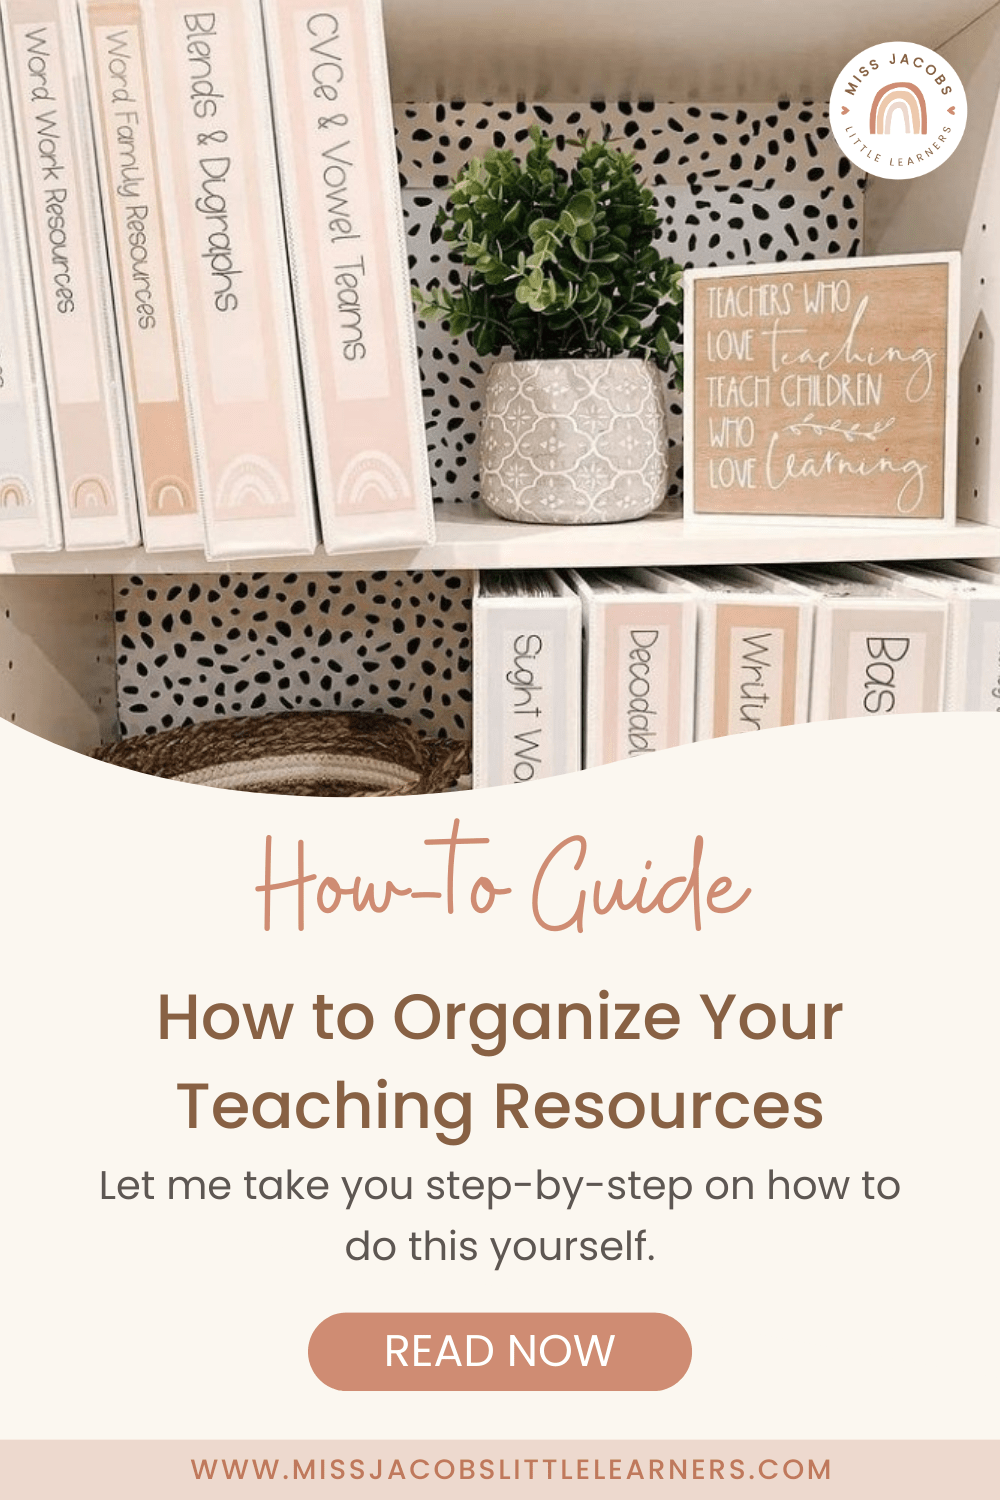 Learning Resources for Teachers